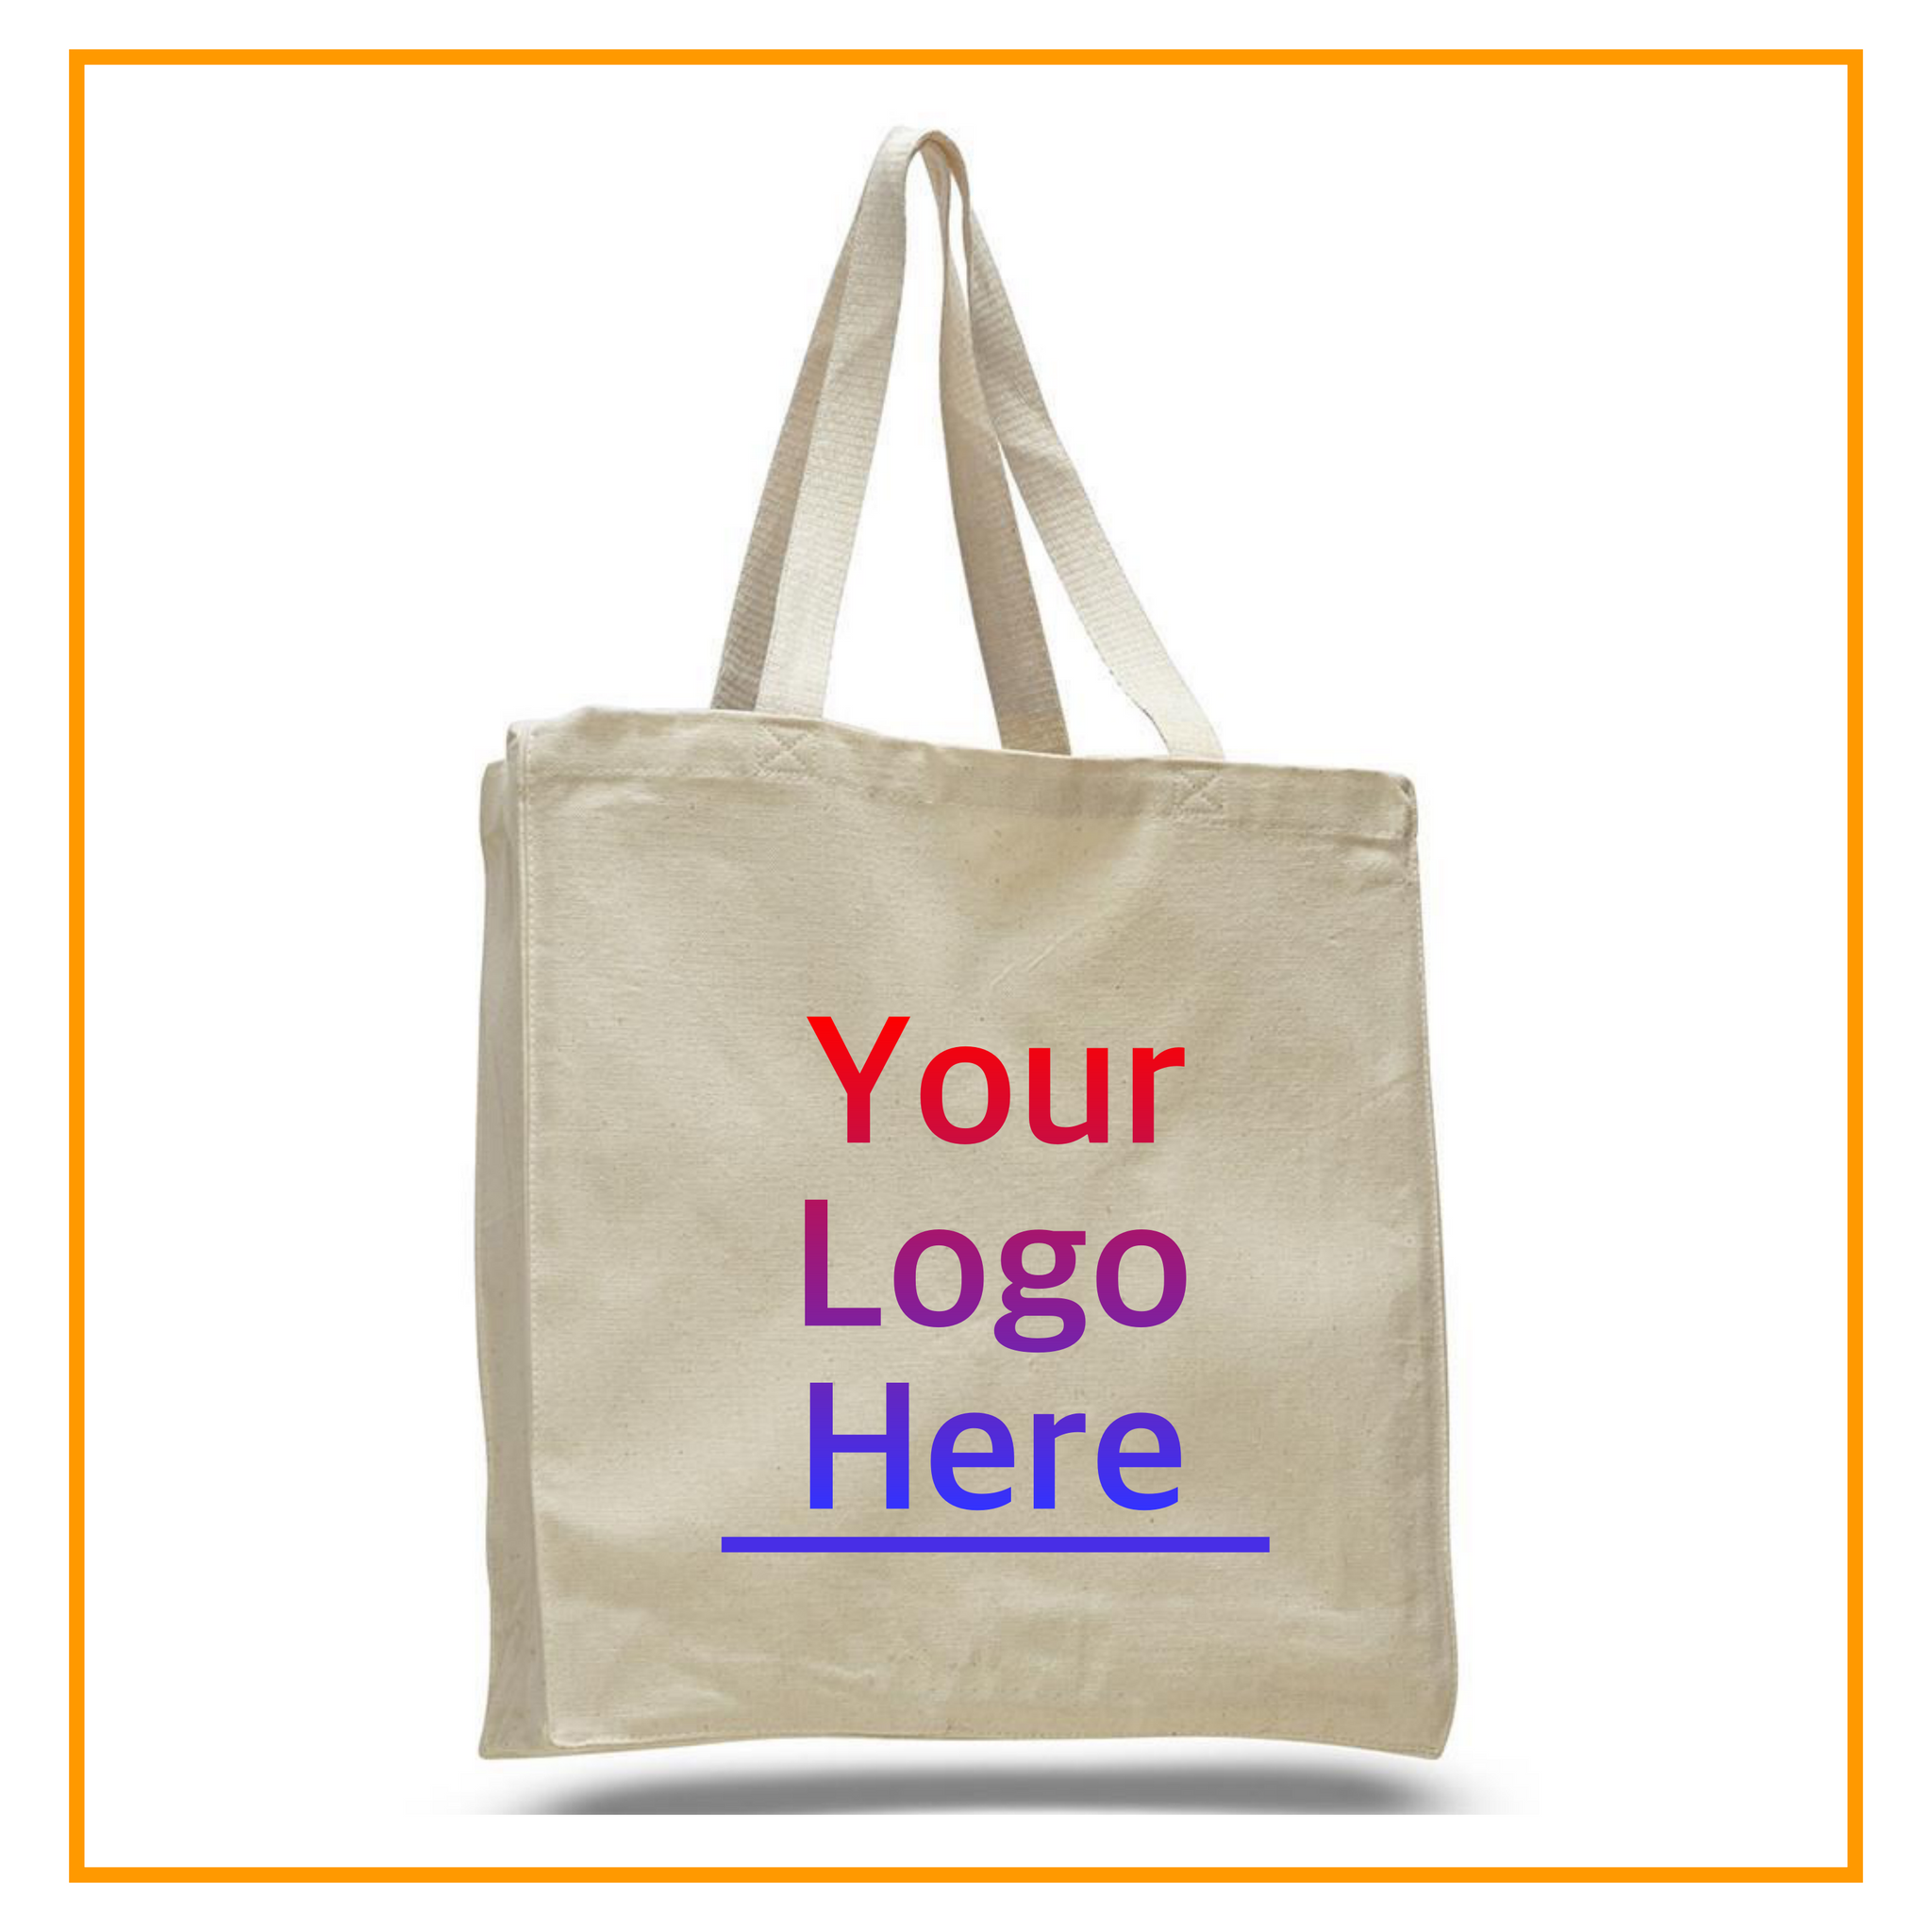 Laminated Non Woven Tote Bag with Full Color Printing on All Sides -  EnduraPack